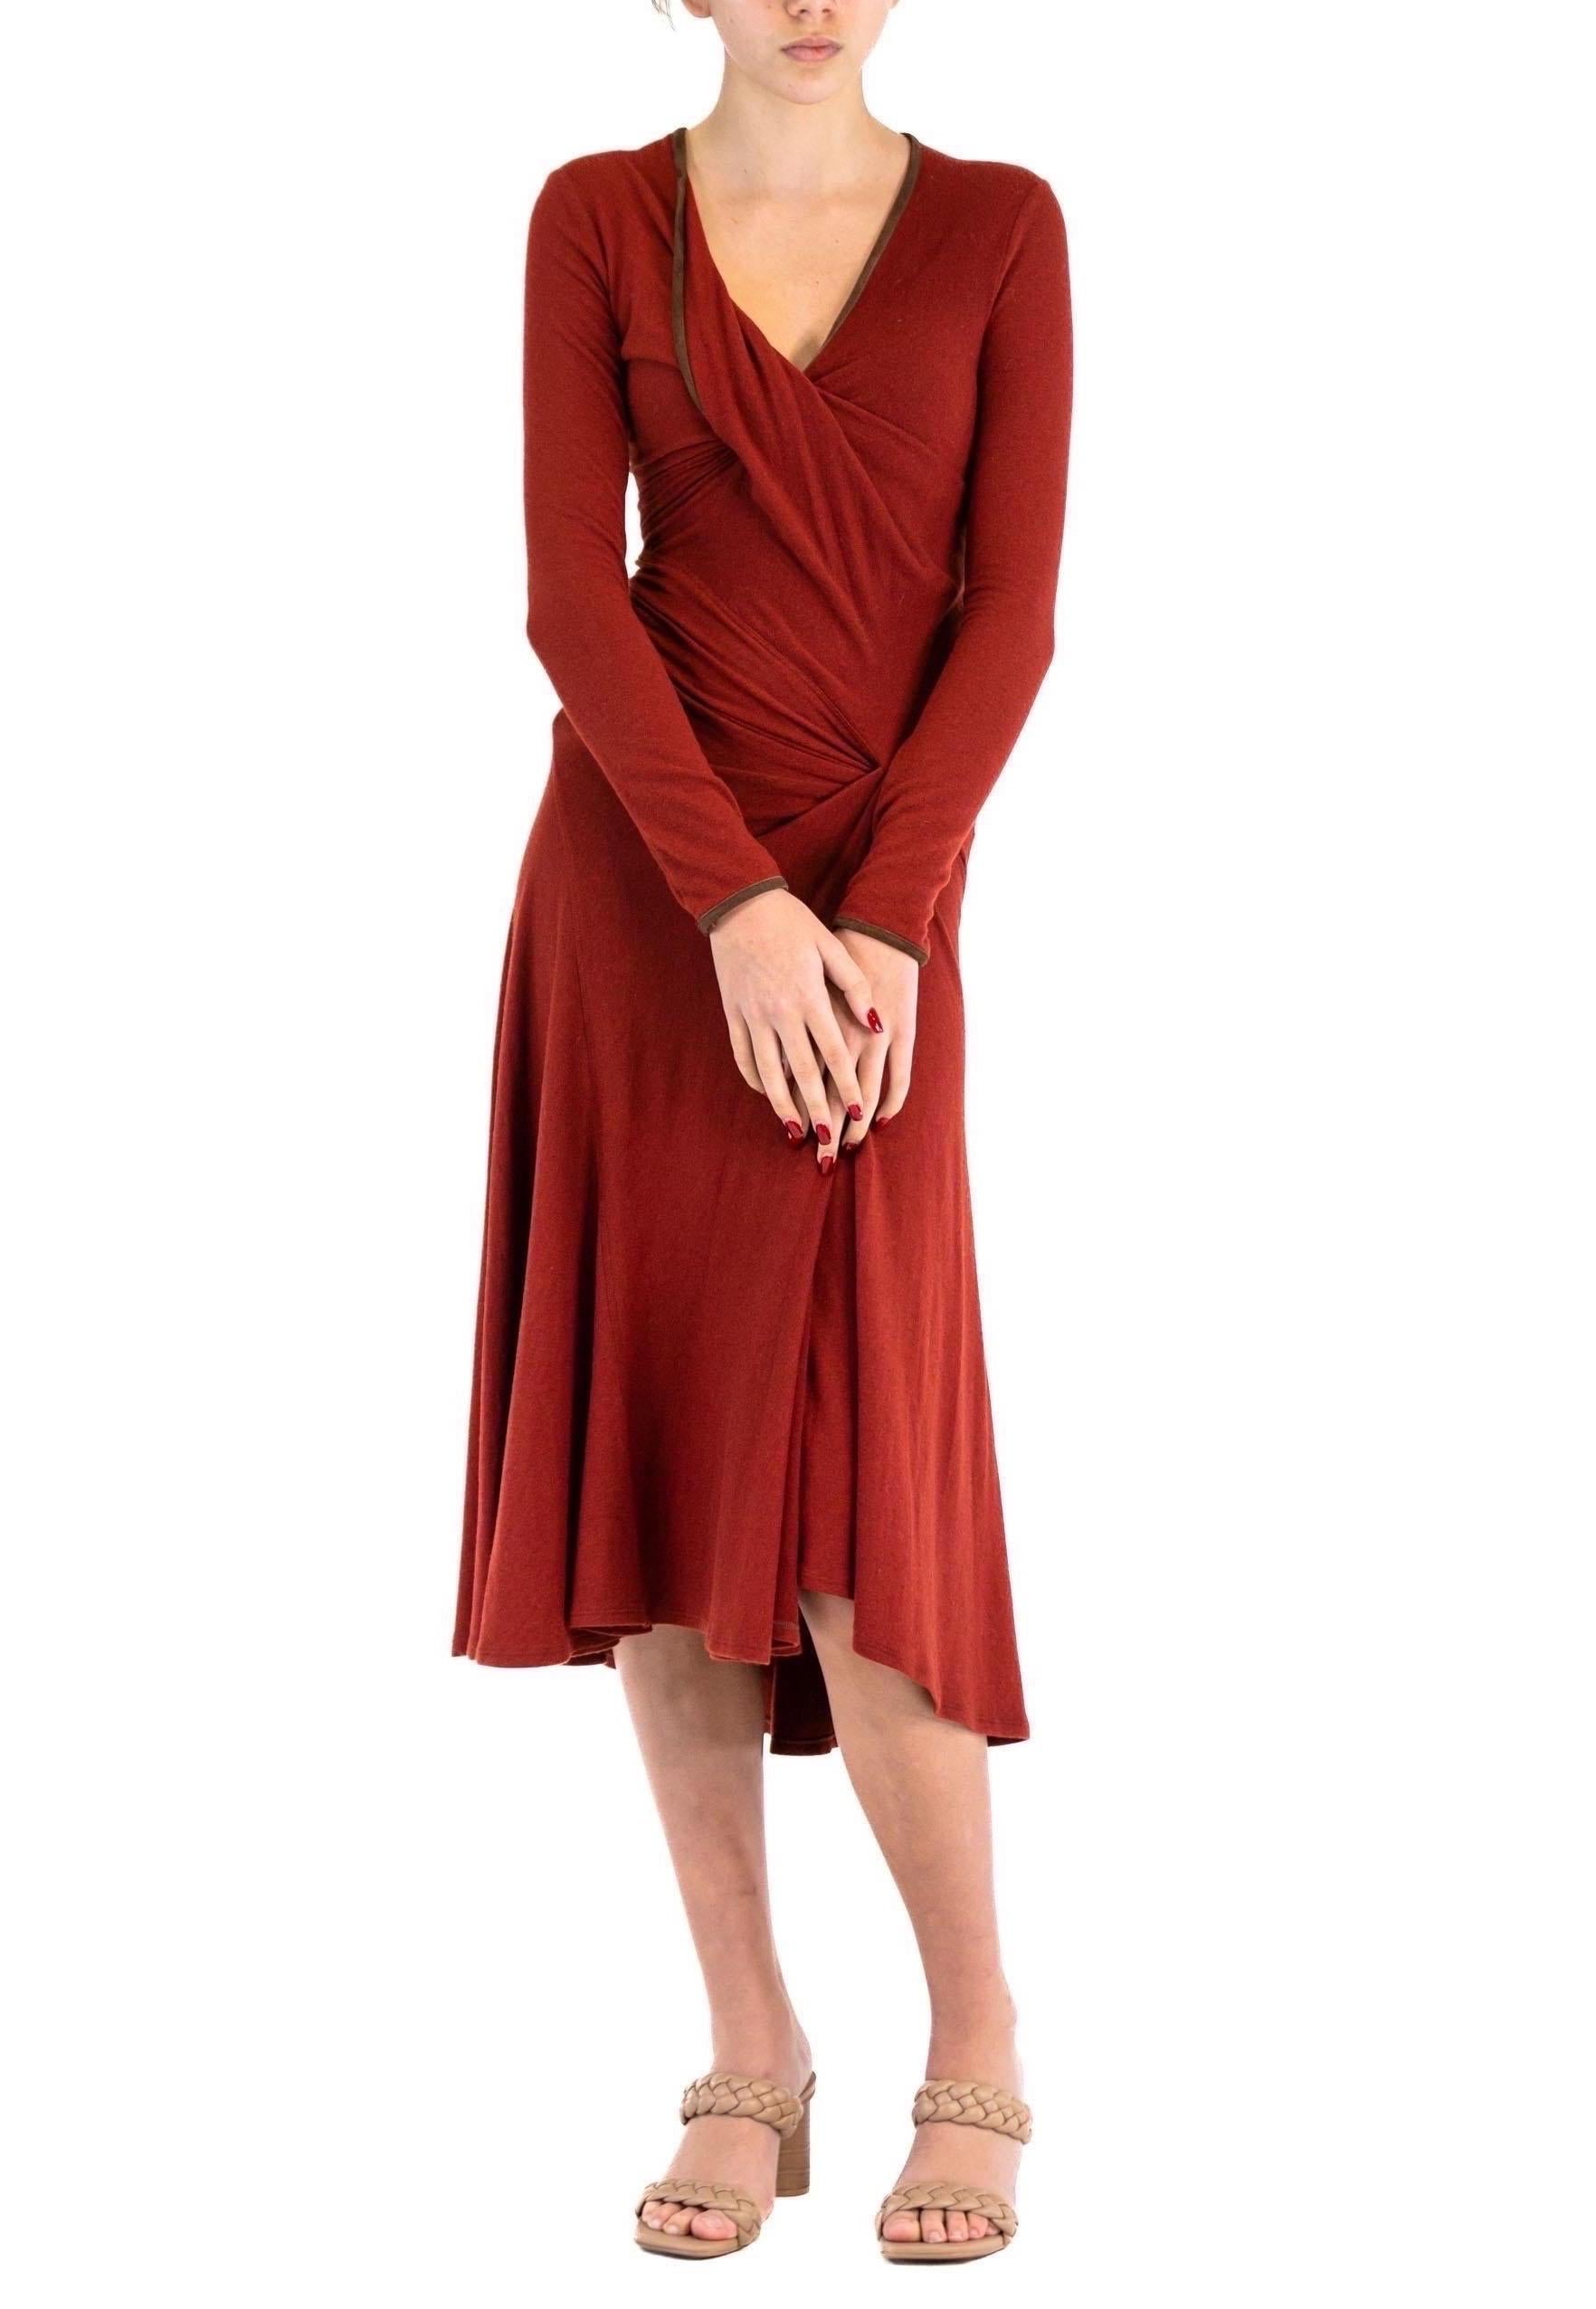 2000S DONNA KARAN Rust Red Wool Blend Jersey Dress With Lambskin Suede Trim For Sale 3